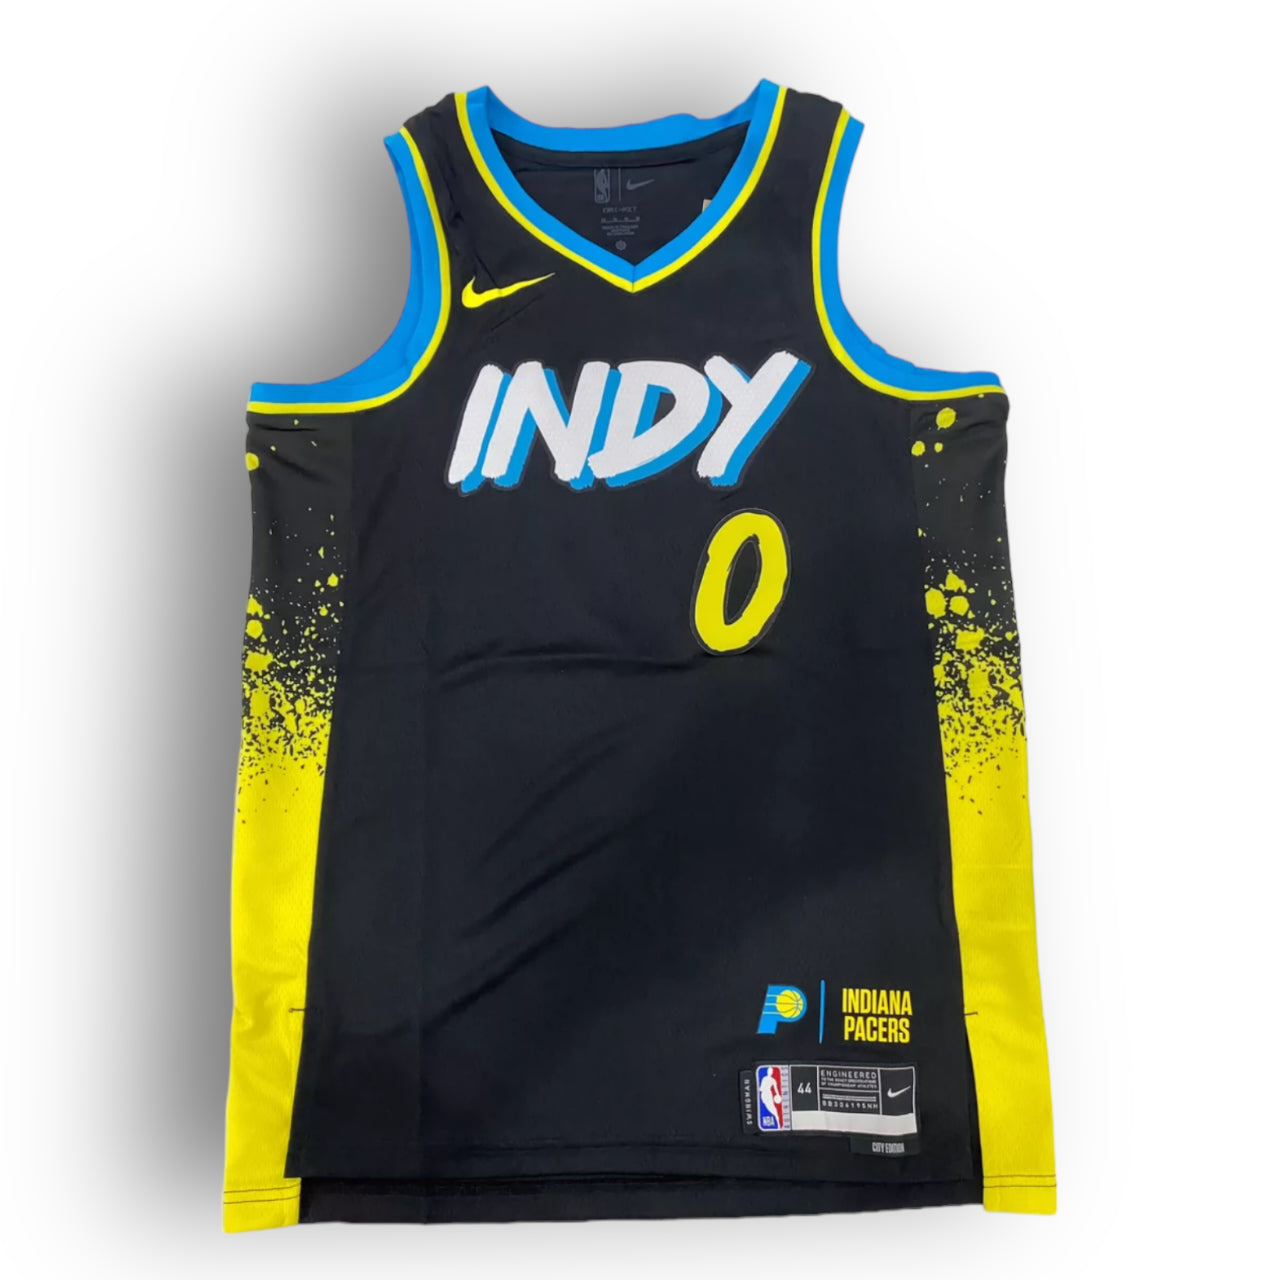 Tyrese Haliburton's Pacers City Edition Jersey embodies Indianapolis's urban energy. The grey color represents the night sky, with neon blue and yellow accents like city lights, and splattered paint patterns evoking street graffiti. The street art style font adds to the urban vibe. This jersey, made with Nike technology, not only offers comfort but also celebrates Haliburton's breakout season, averaging 24.7 points and 12.5 assists per game.